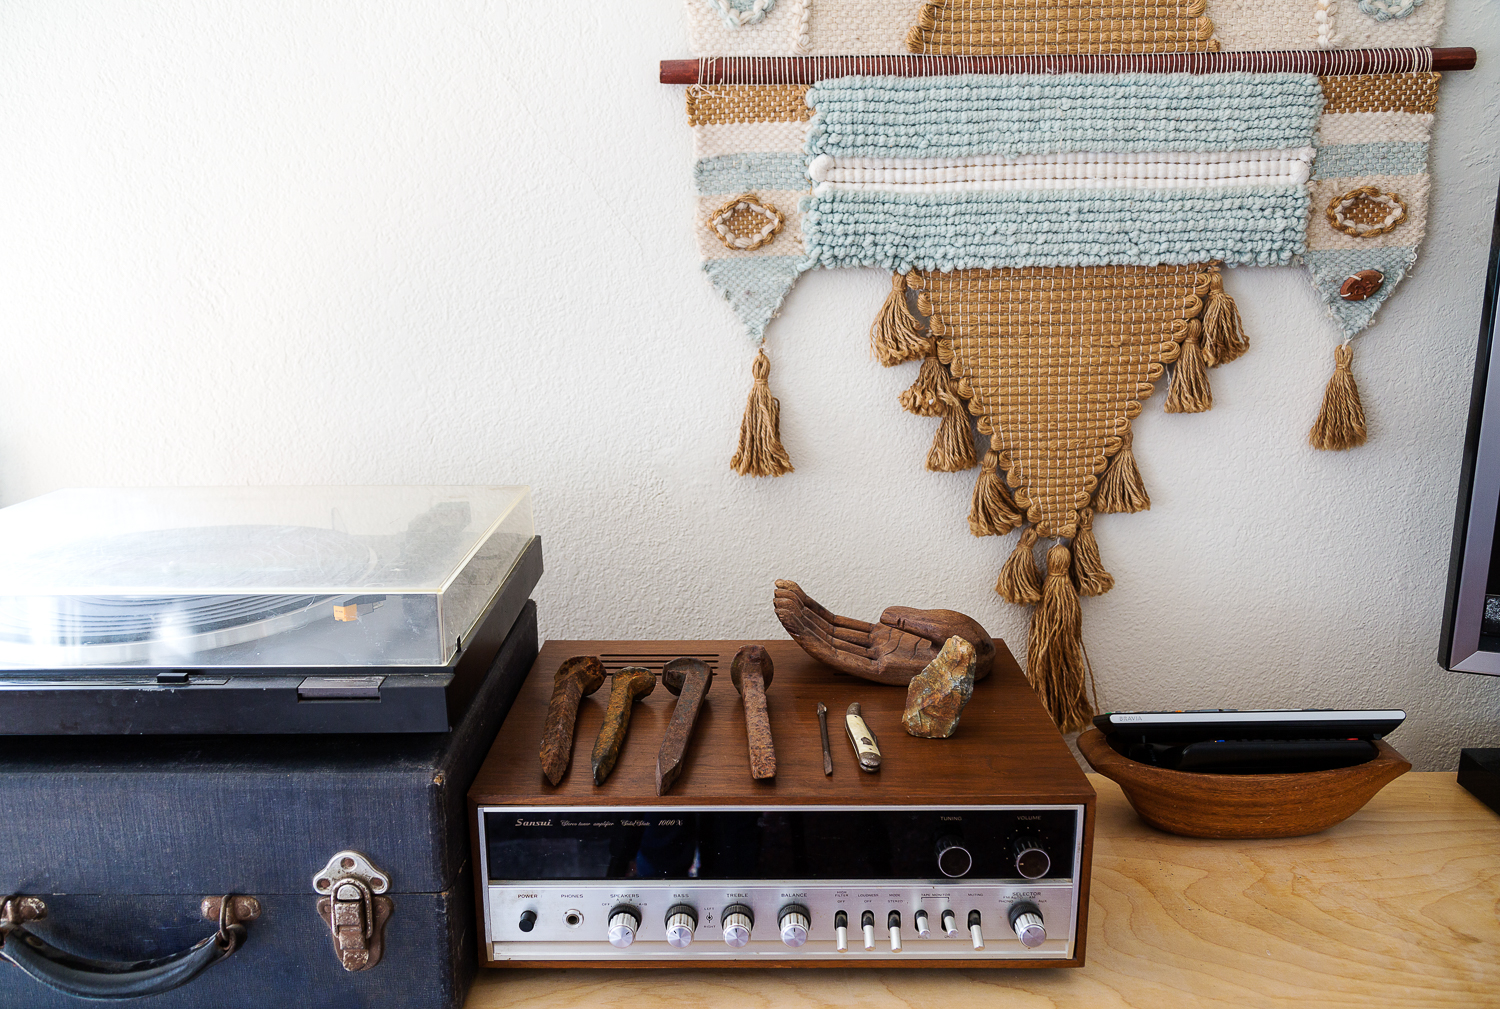  A vintage record table vignette. Flea-found railroad spikes, wooden palm, and an original Don Freedman fiber wall hanging from the '70's. 